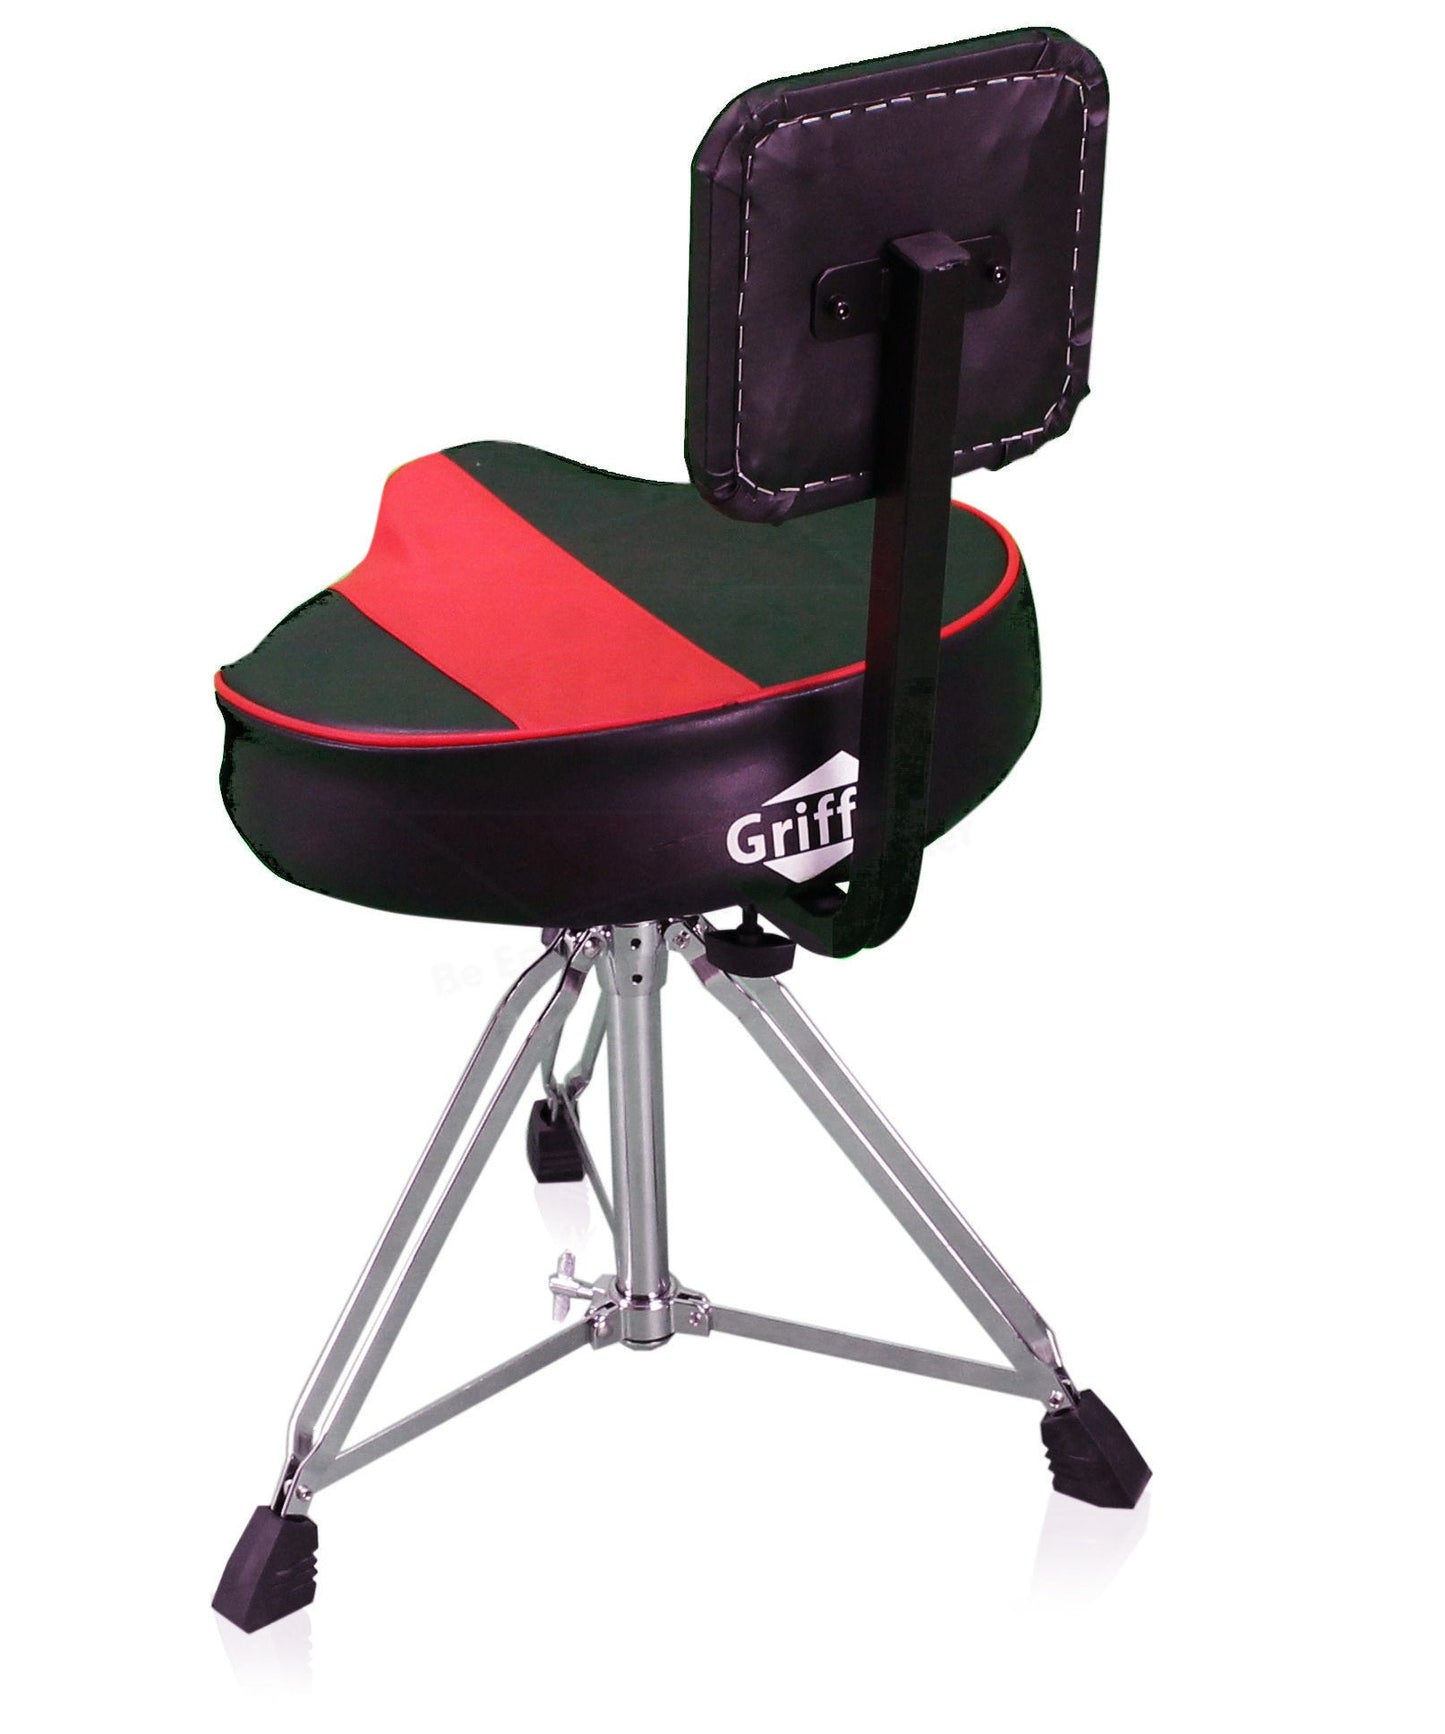 Saddle Drum Throne with Backrest Support by GRIFFIN - Padded Leather Drummer Motorcycle Biker Style